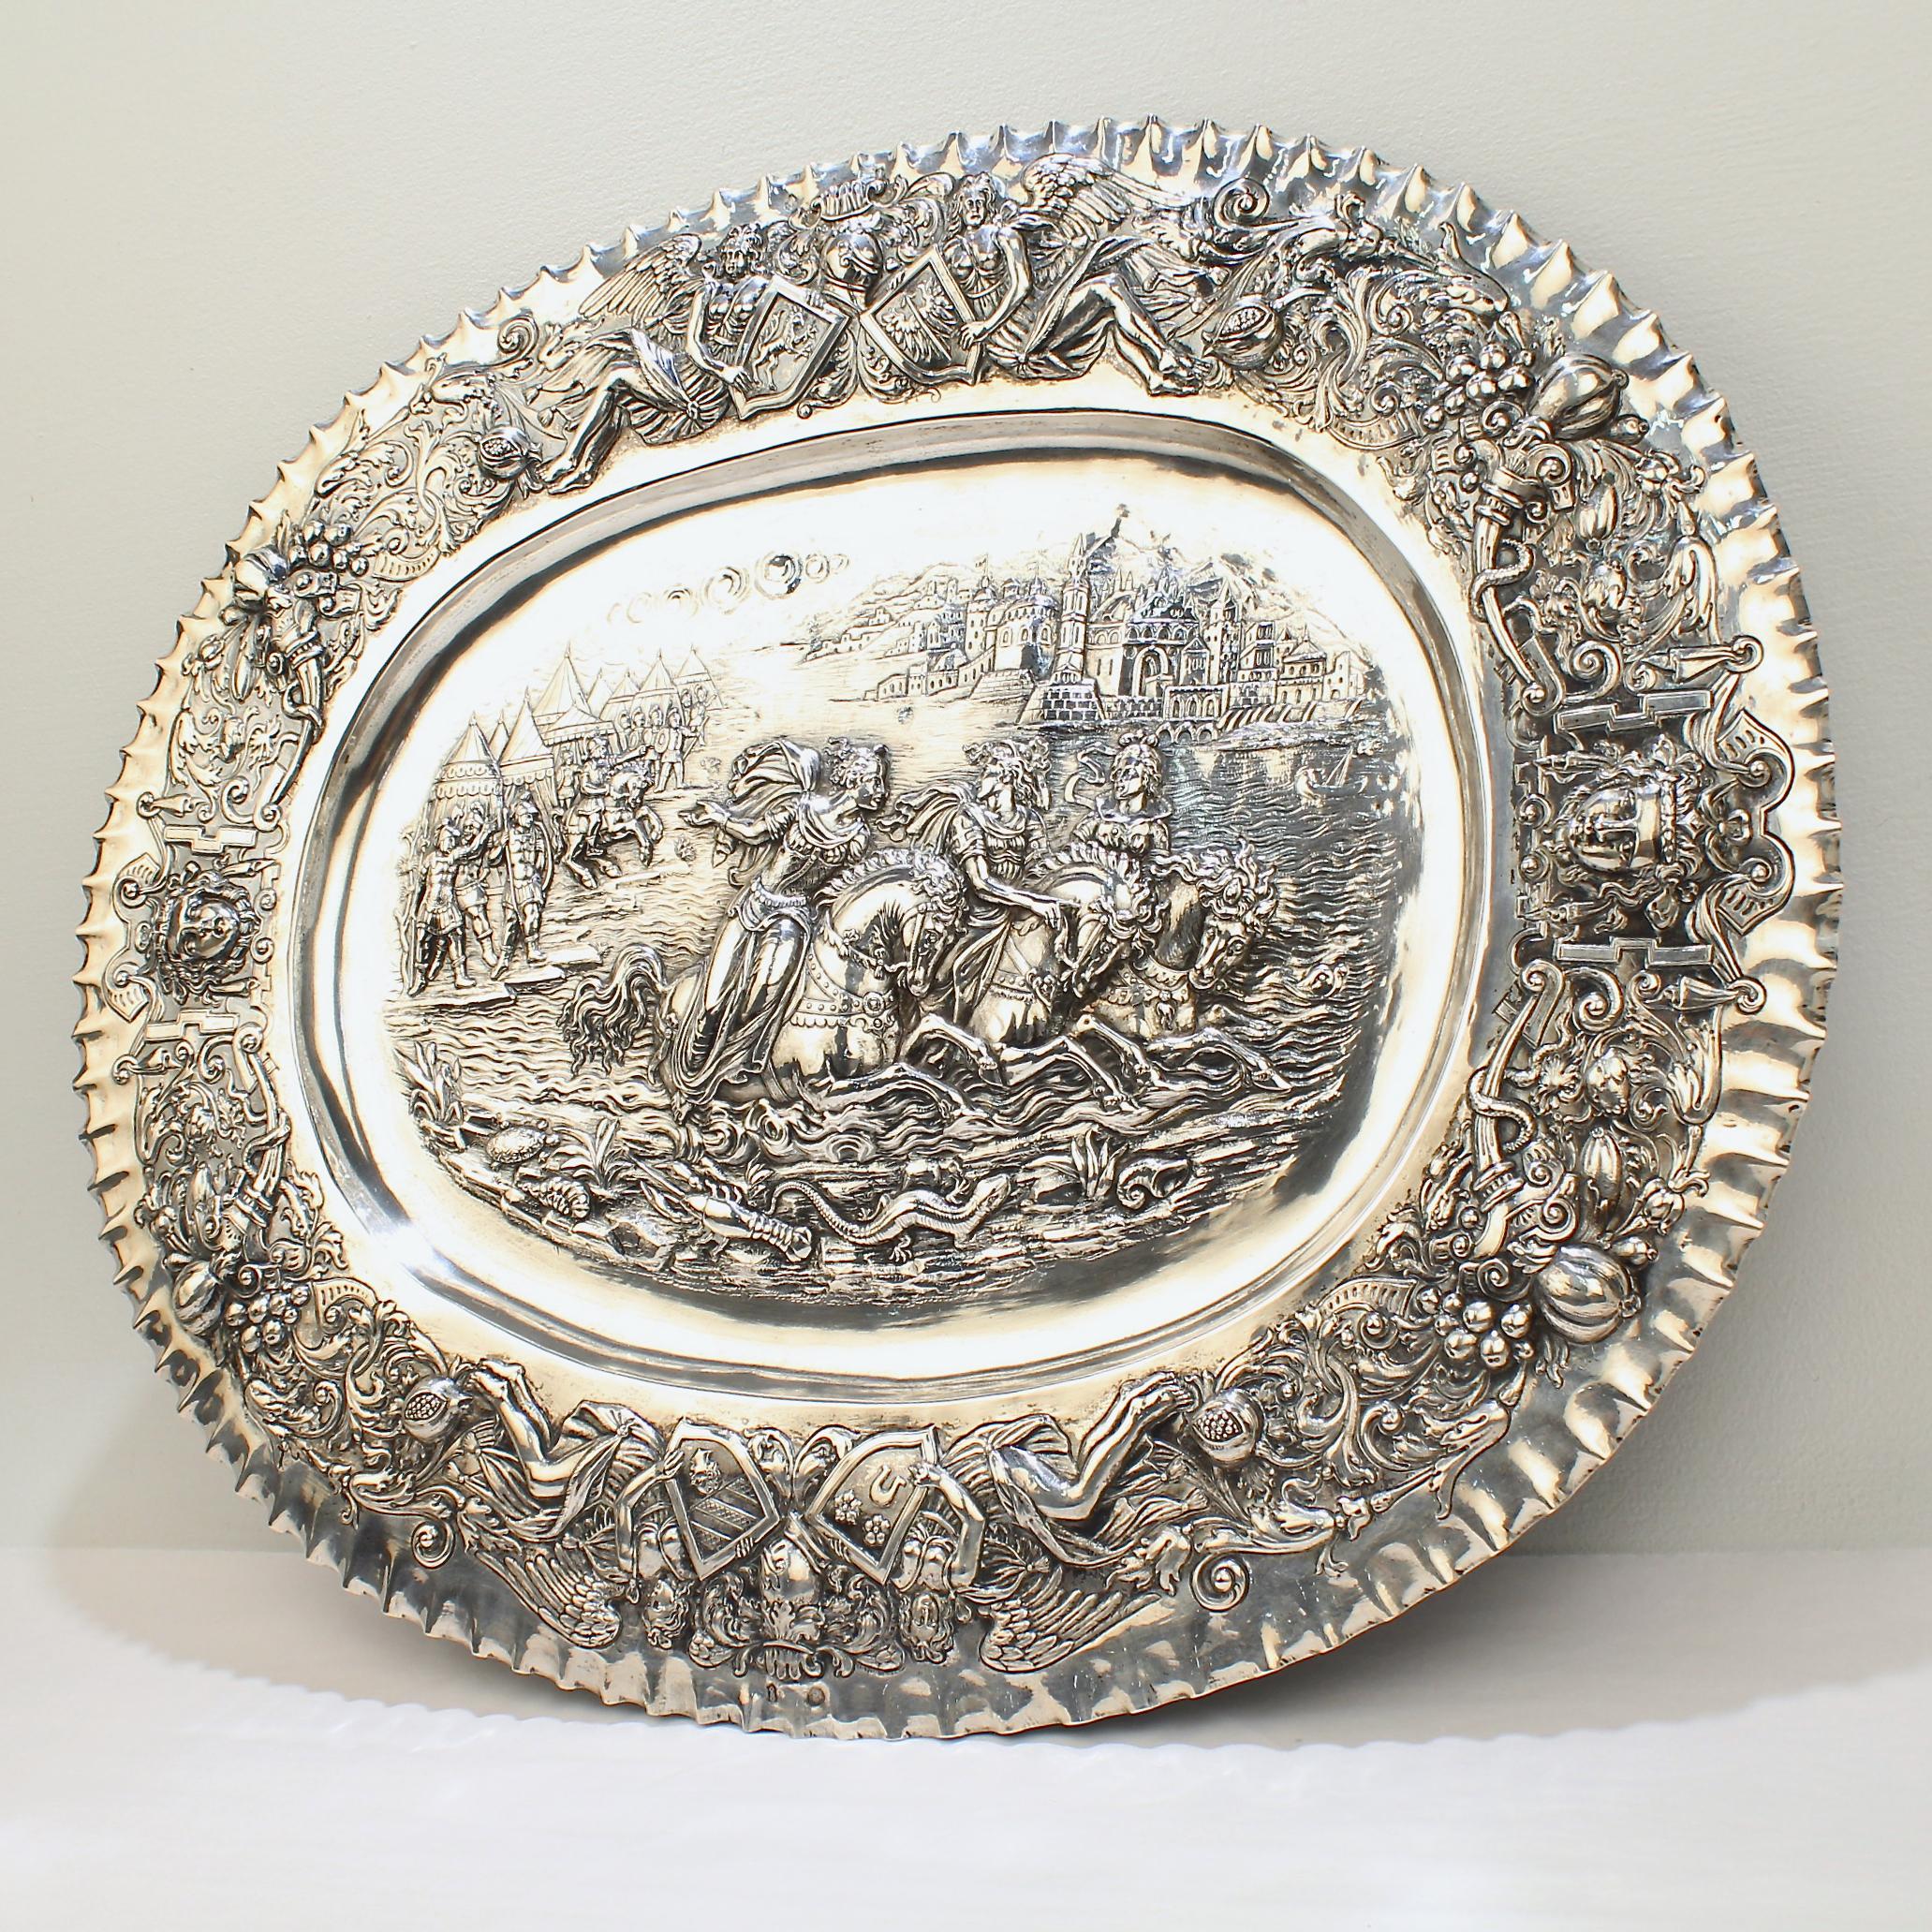 A very fine German Renaissance Revival or 'Gründerzeit' silver tray.

Decorated with an incredible tour-de-force of repousse decoration that is centered around a large scene with 3 maidens escaping on horseback from a Roman Soldier encampment across